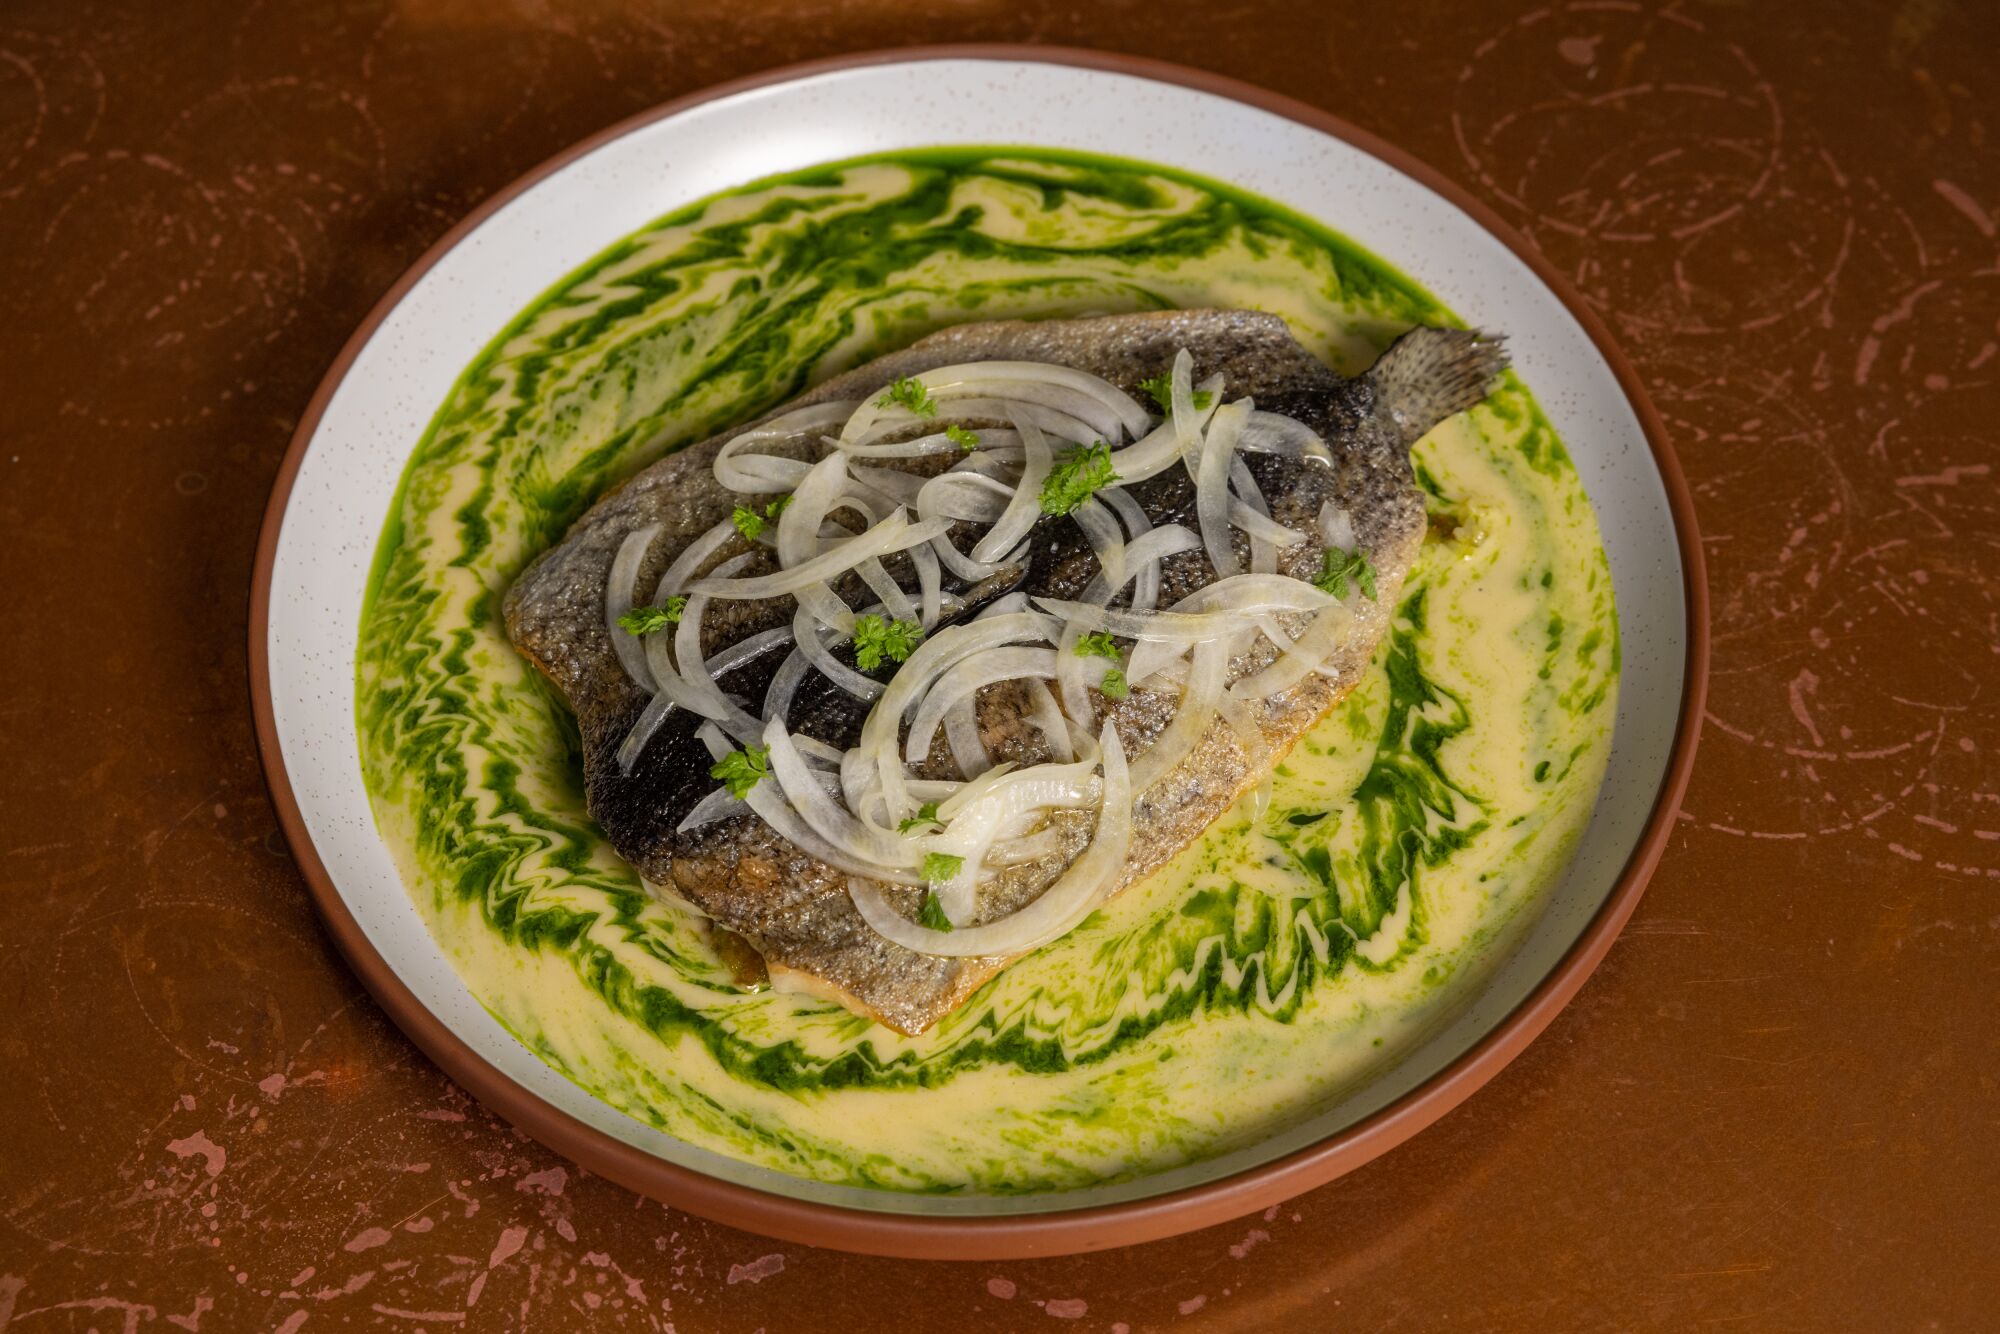 A plate of trout topped with onions and sitting in a yellow and green sauce